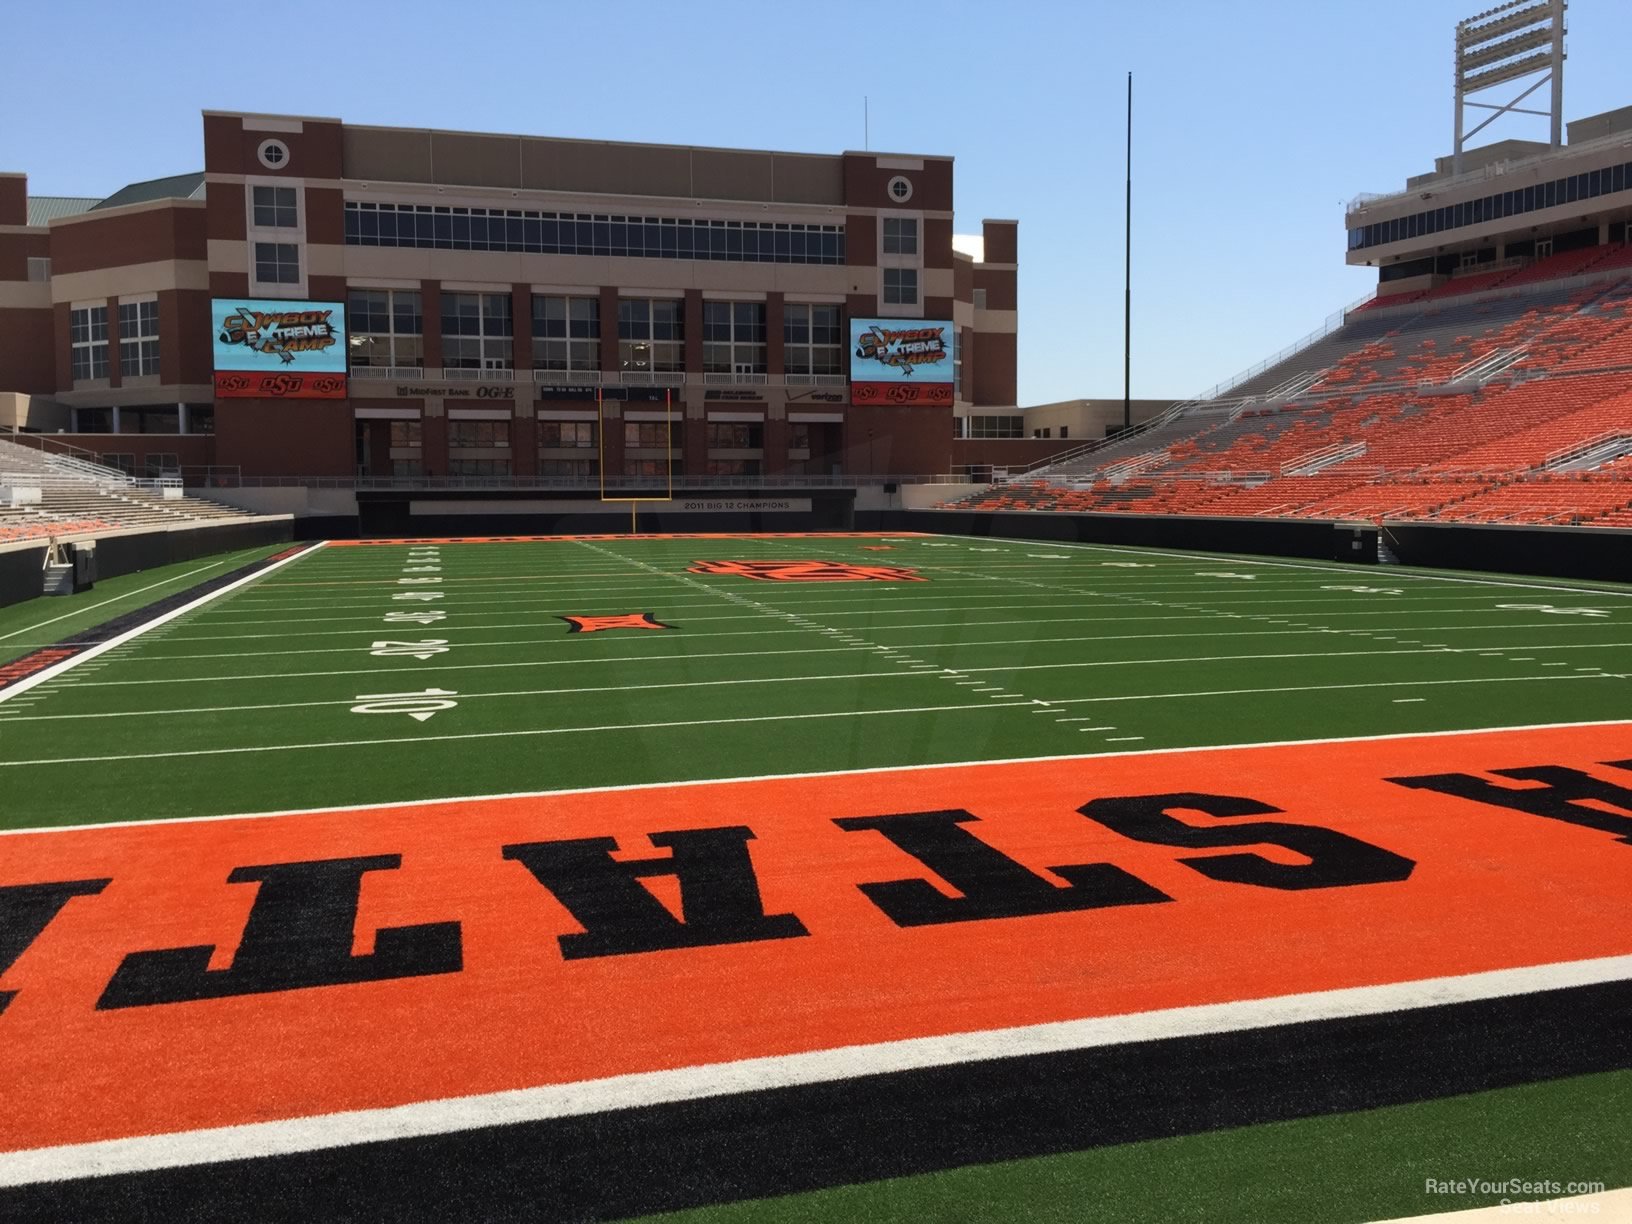 section 113, row 4 seat view  - boone pickens stadium